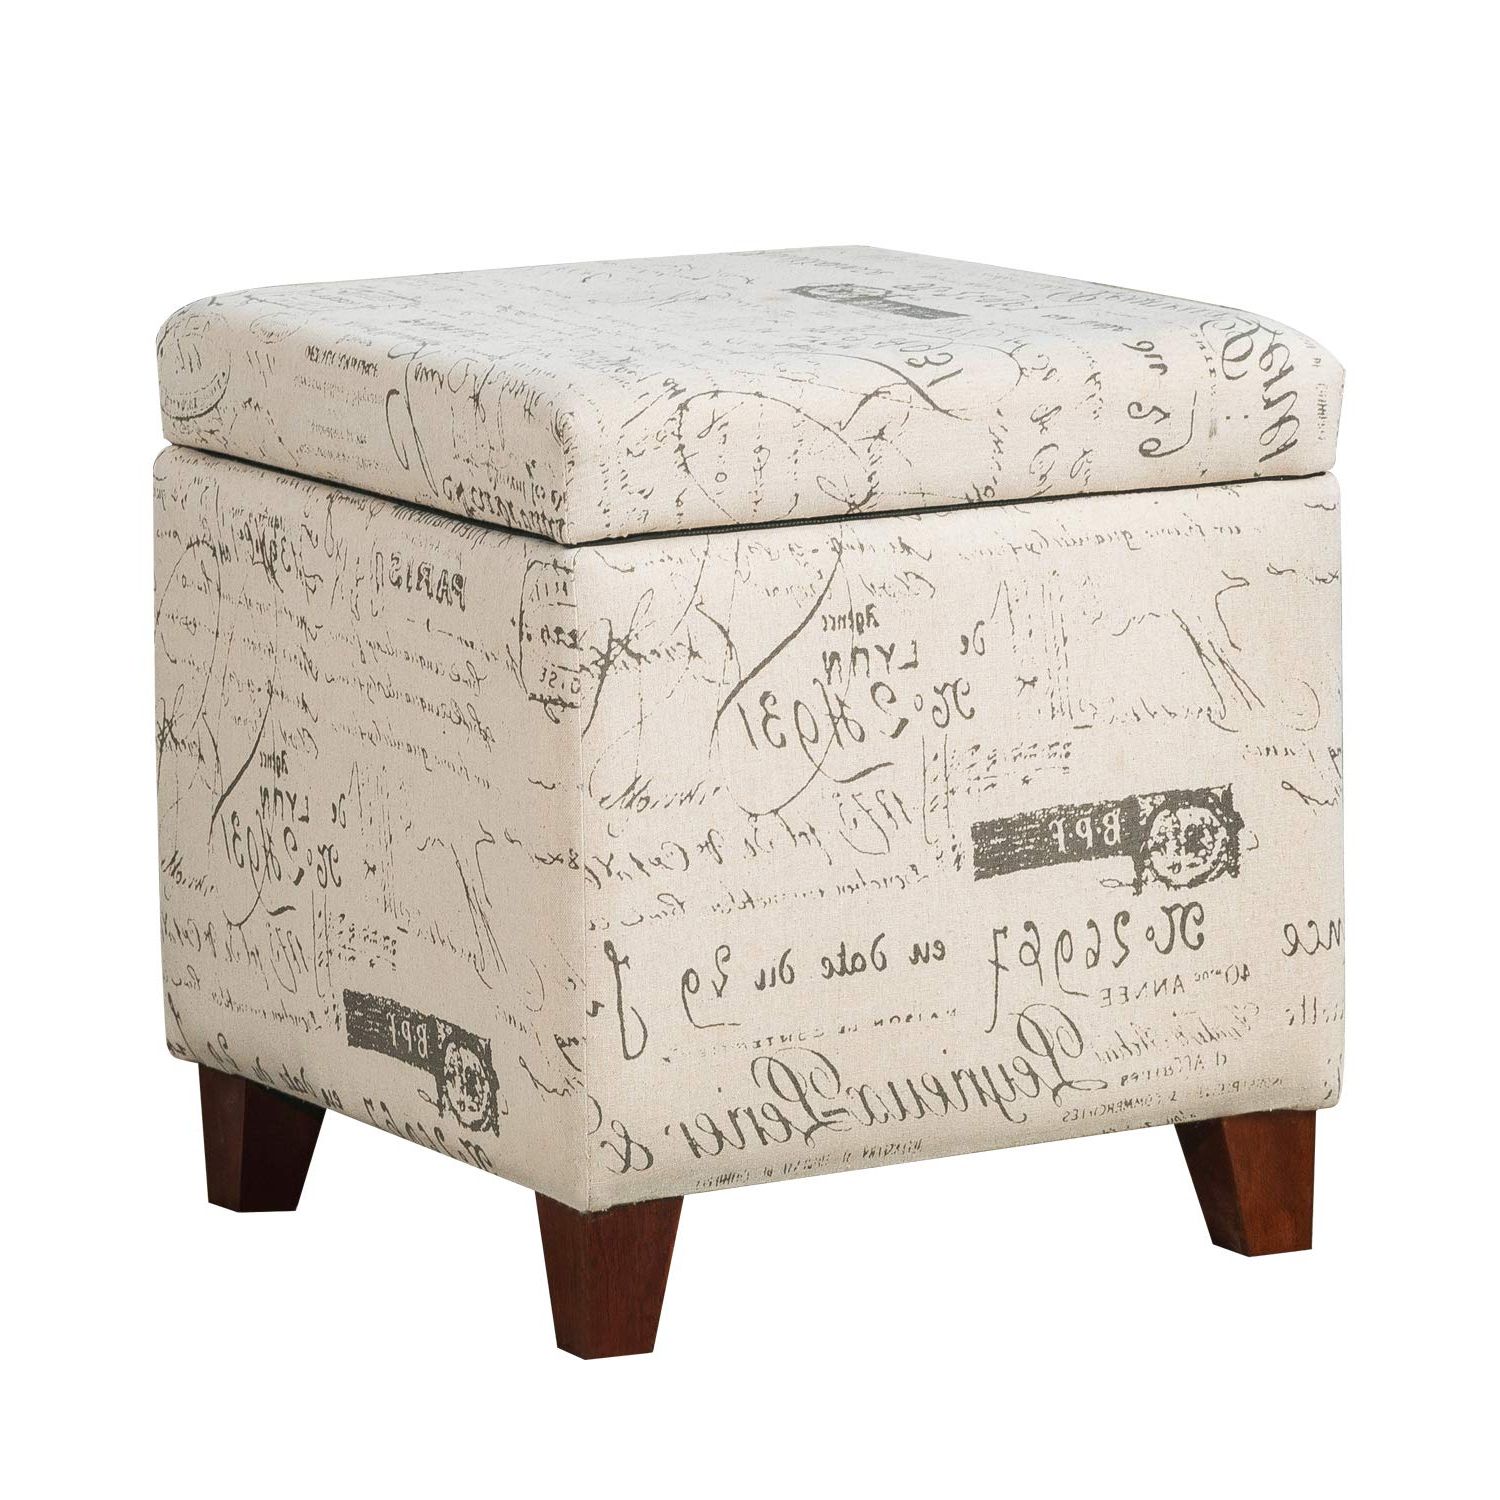 Most Popular Wood Storage Ottomans Intended For Amazon: Adeco Fabric Script Pattern Cube Storage Footstool, Hinged Lid,  Solid Wood Legs, 18" Height Ottomans & Storage Ottomans, Cream White : Home  & Kitchen (View 4 of 10)